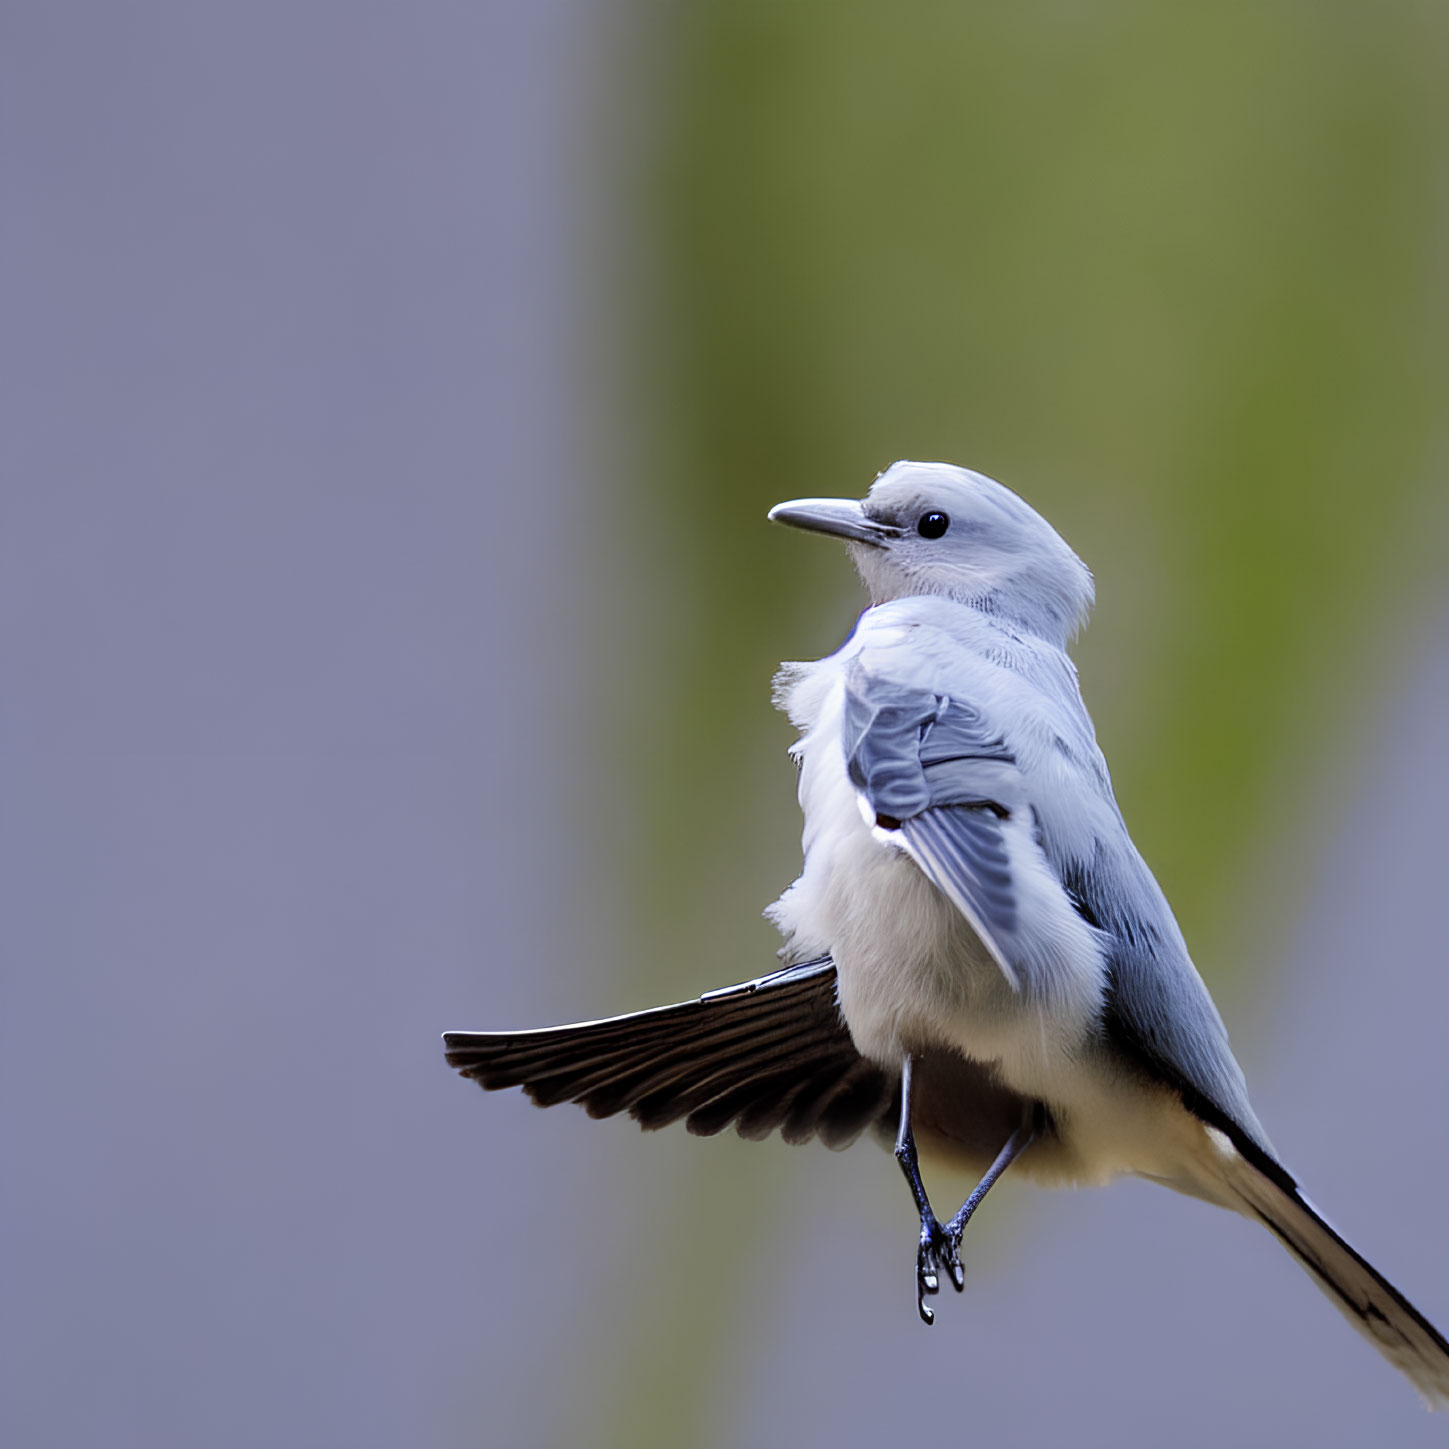 White and Grey Bird Perched on Thin Branch with Soft-focus Green Background